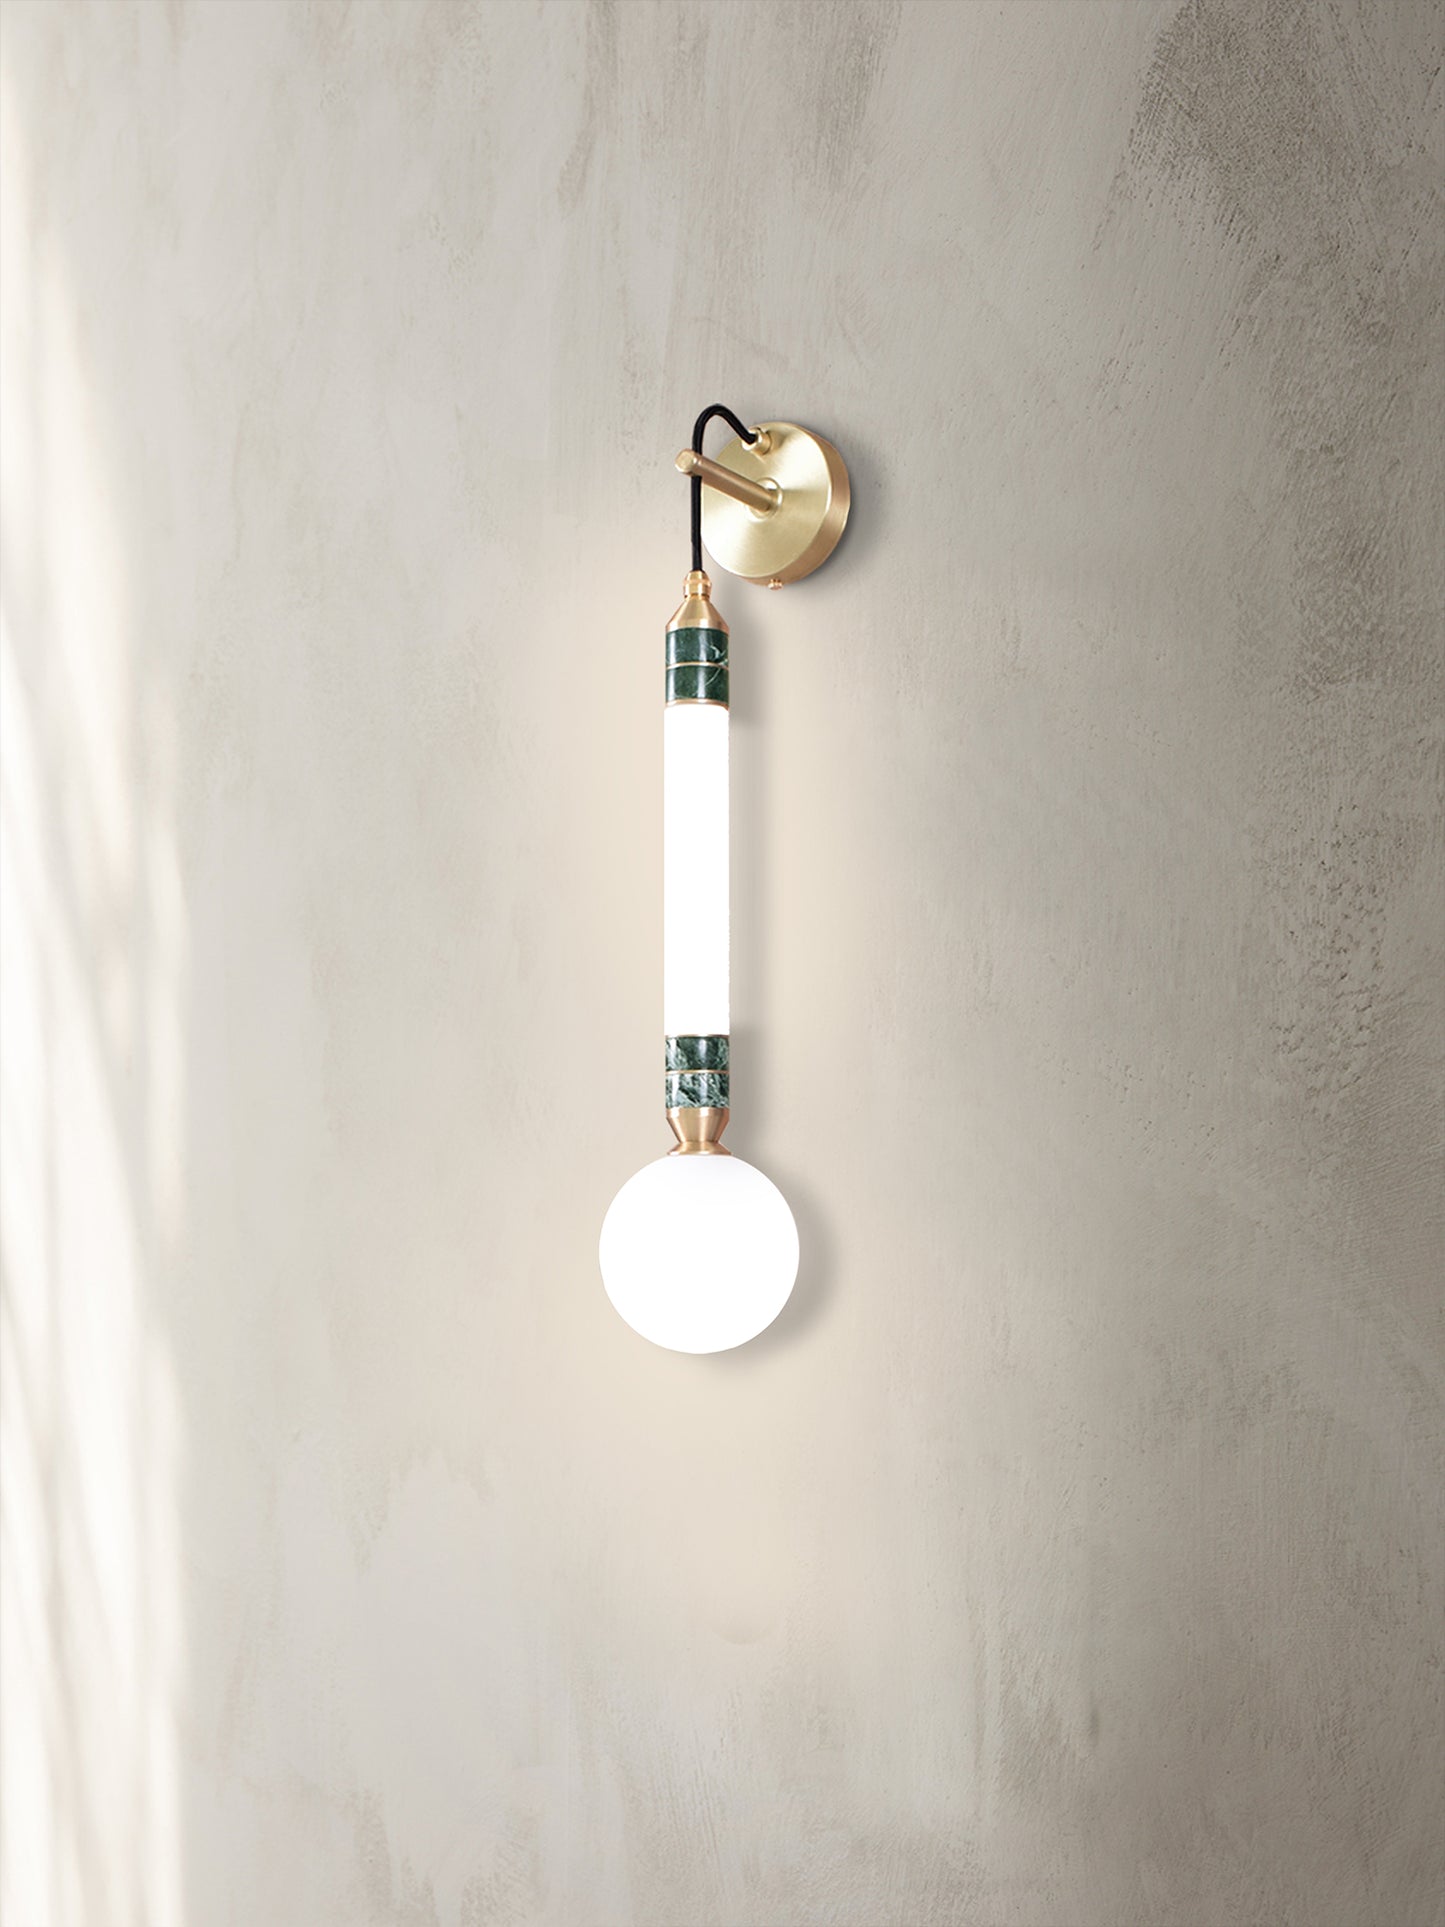 Greenstone Small Wall Light, side view on wall.